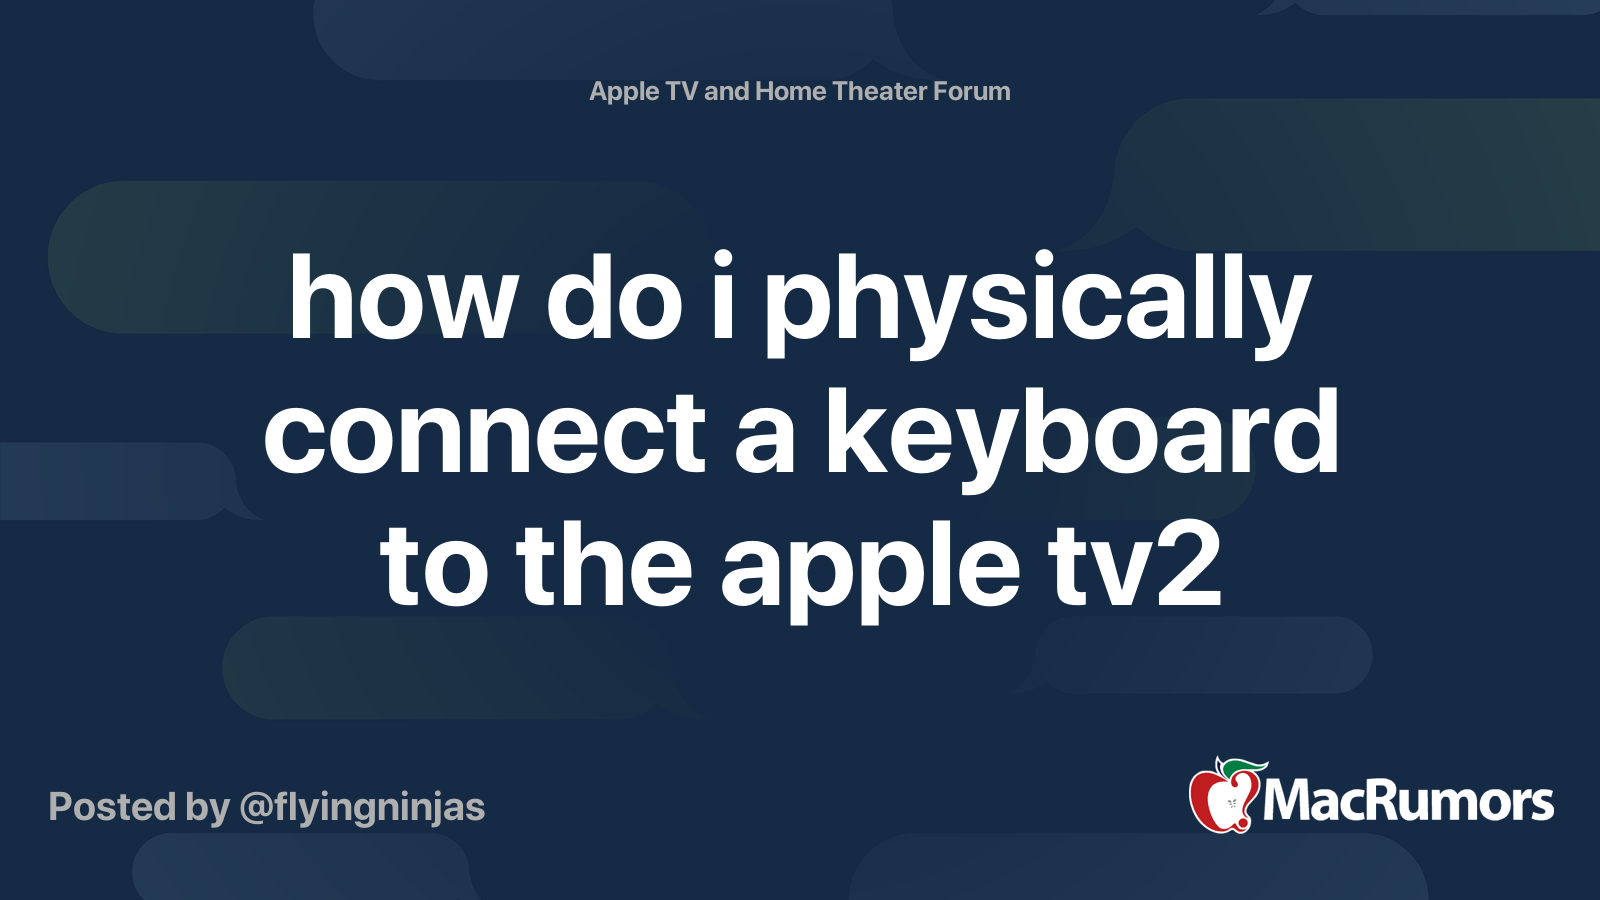 how i physically connect a to the apple tv2 | MacRumors Forums